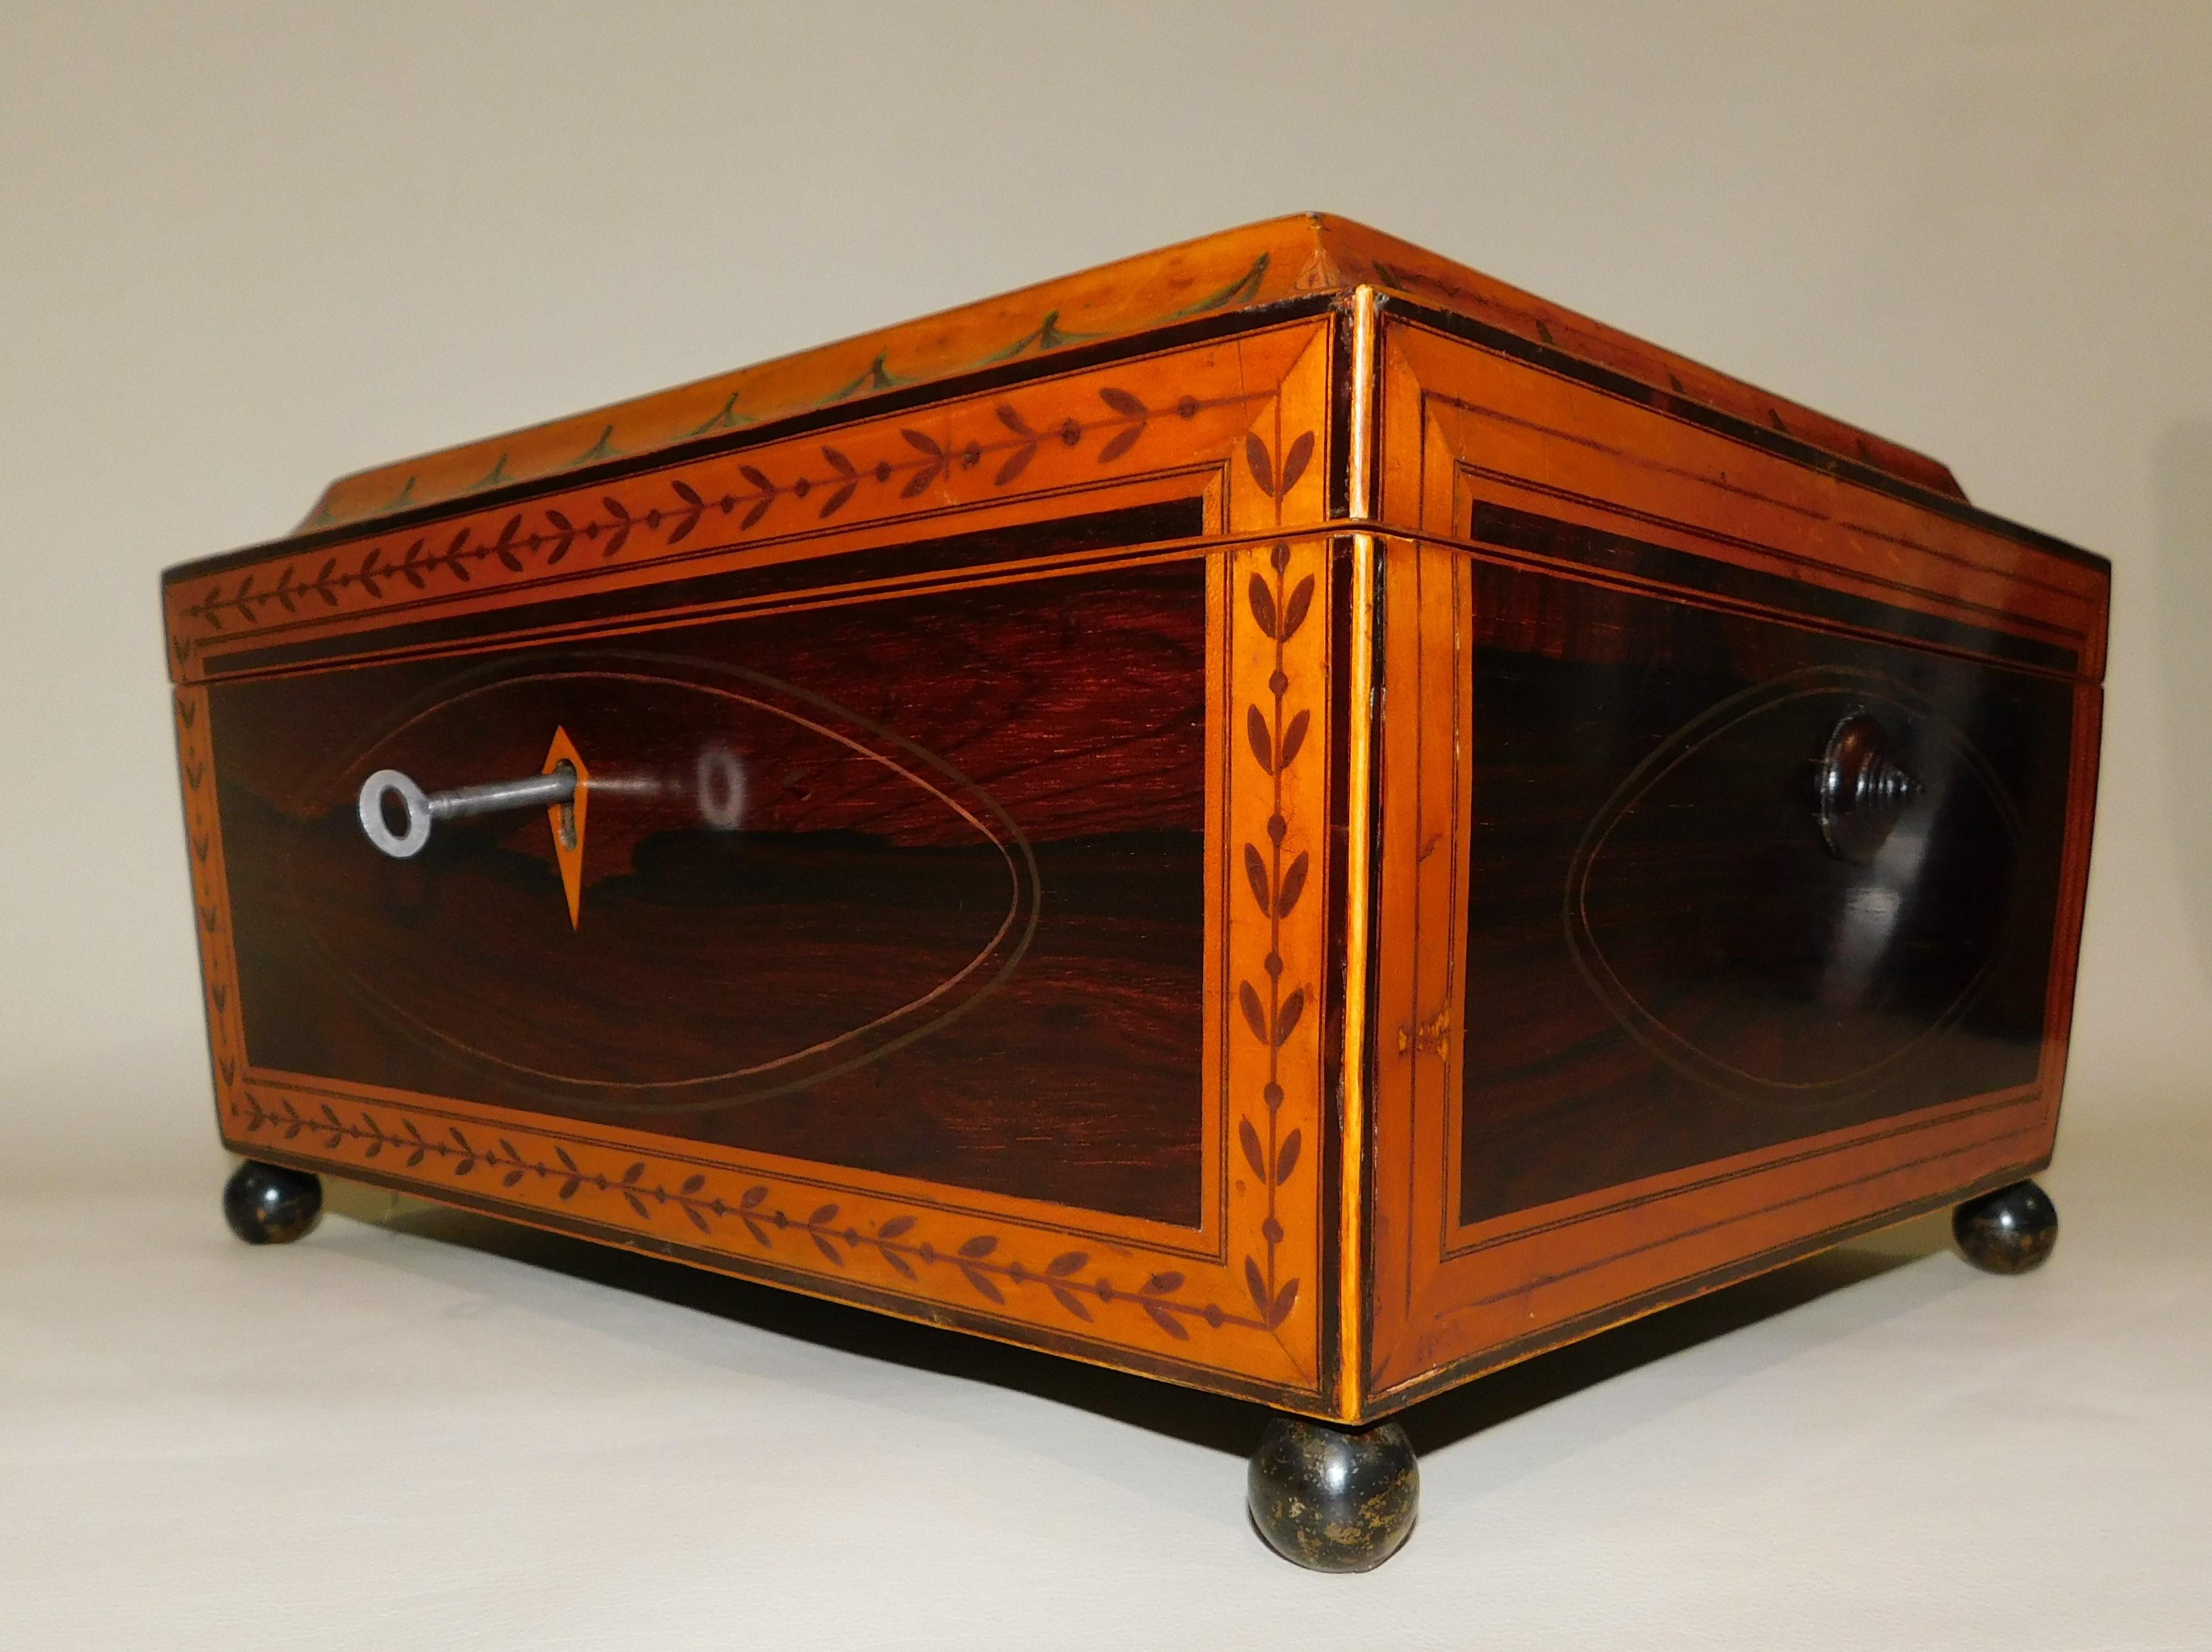 Georgian Satinwood Sewing Box circa 1825 with Lock and Key In Good Condition For Sale In Hamilton, Ontario